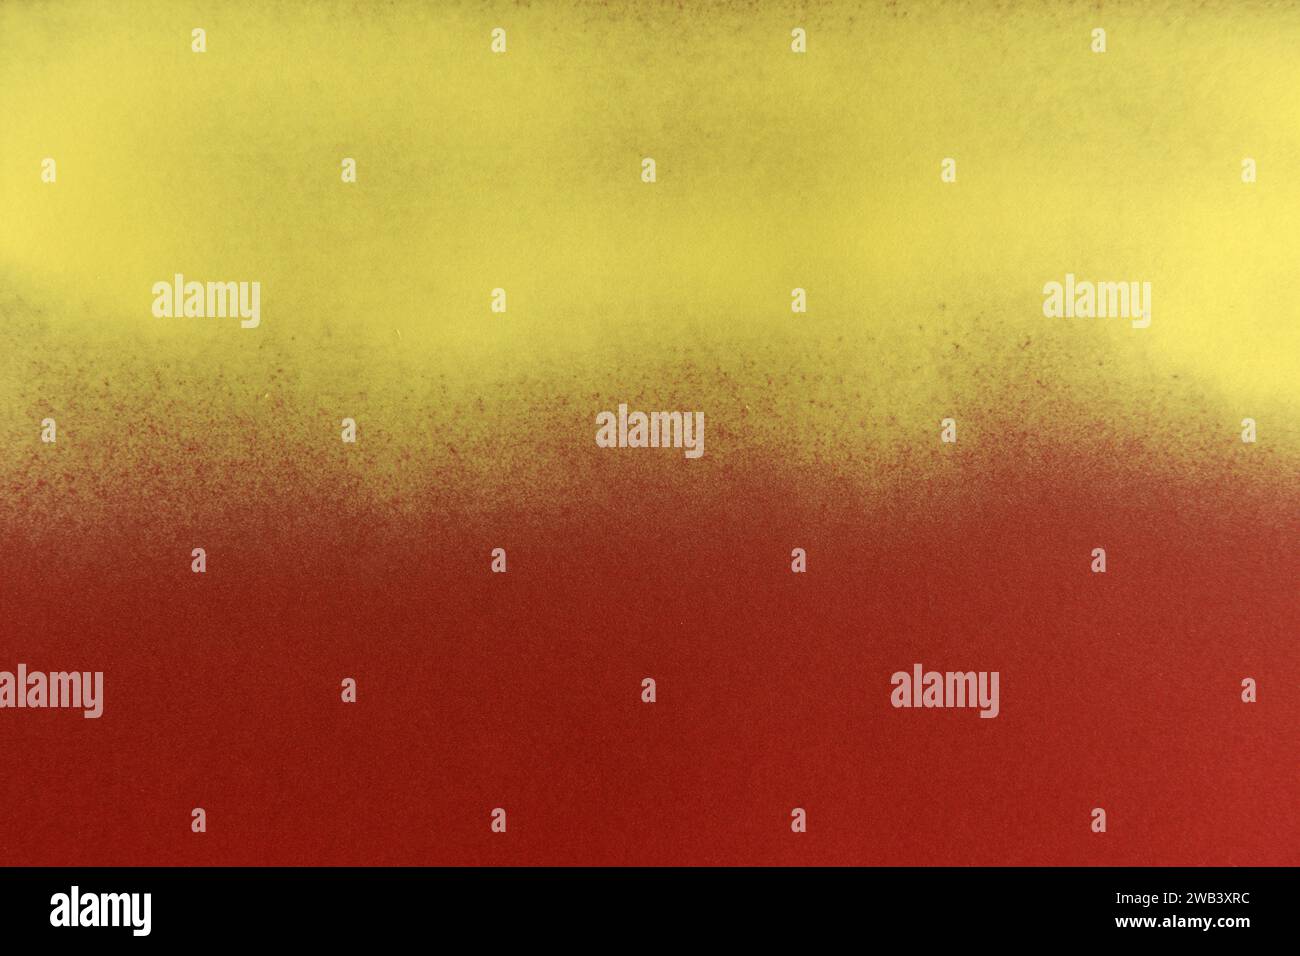 yellow spray paint on red paper background Stock Photo